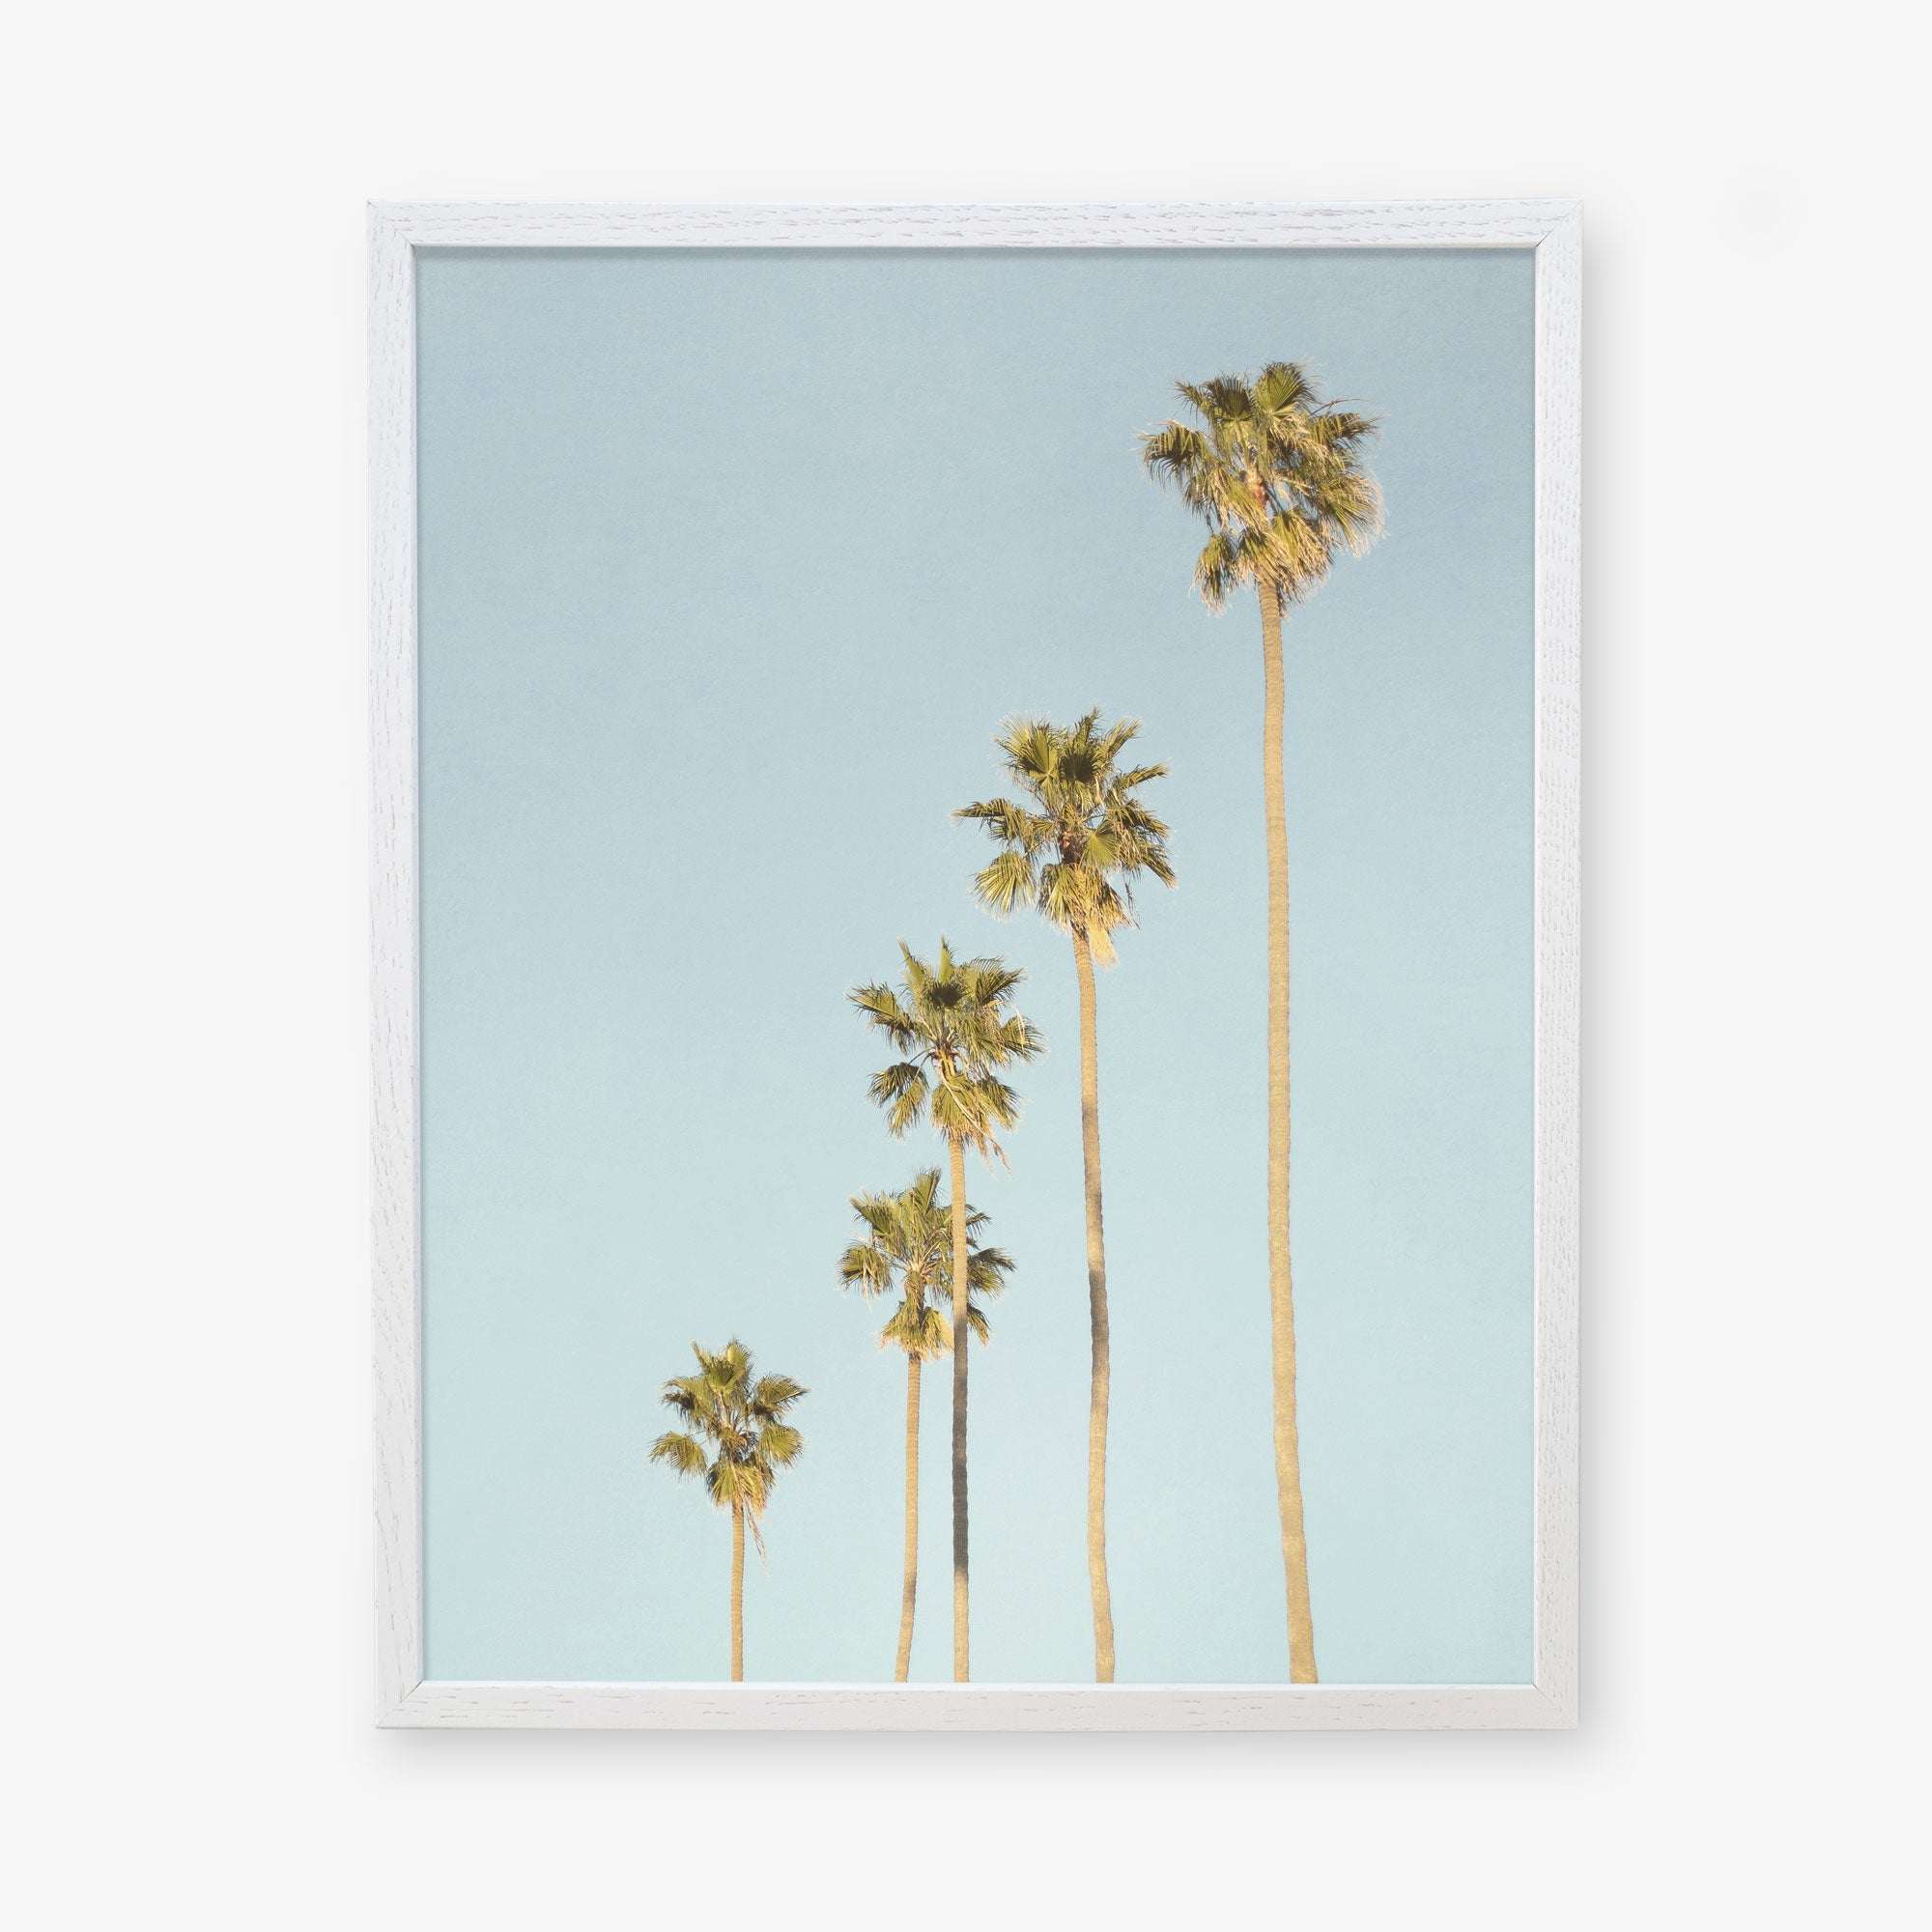 A framed Los Angeles Palm Tree Photographic Print &#39;Palm Tree Steps&#39; by Offley Green, featuring five tall palm trees against a clear sky in a minimalist California style with a focus on vertical lines and light colors.